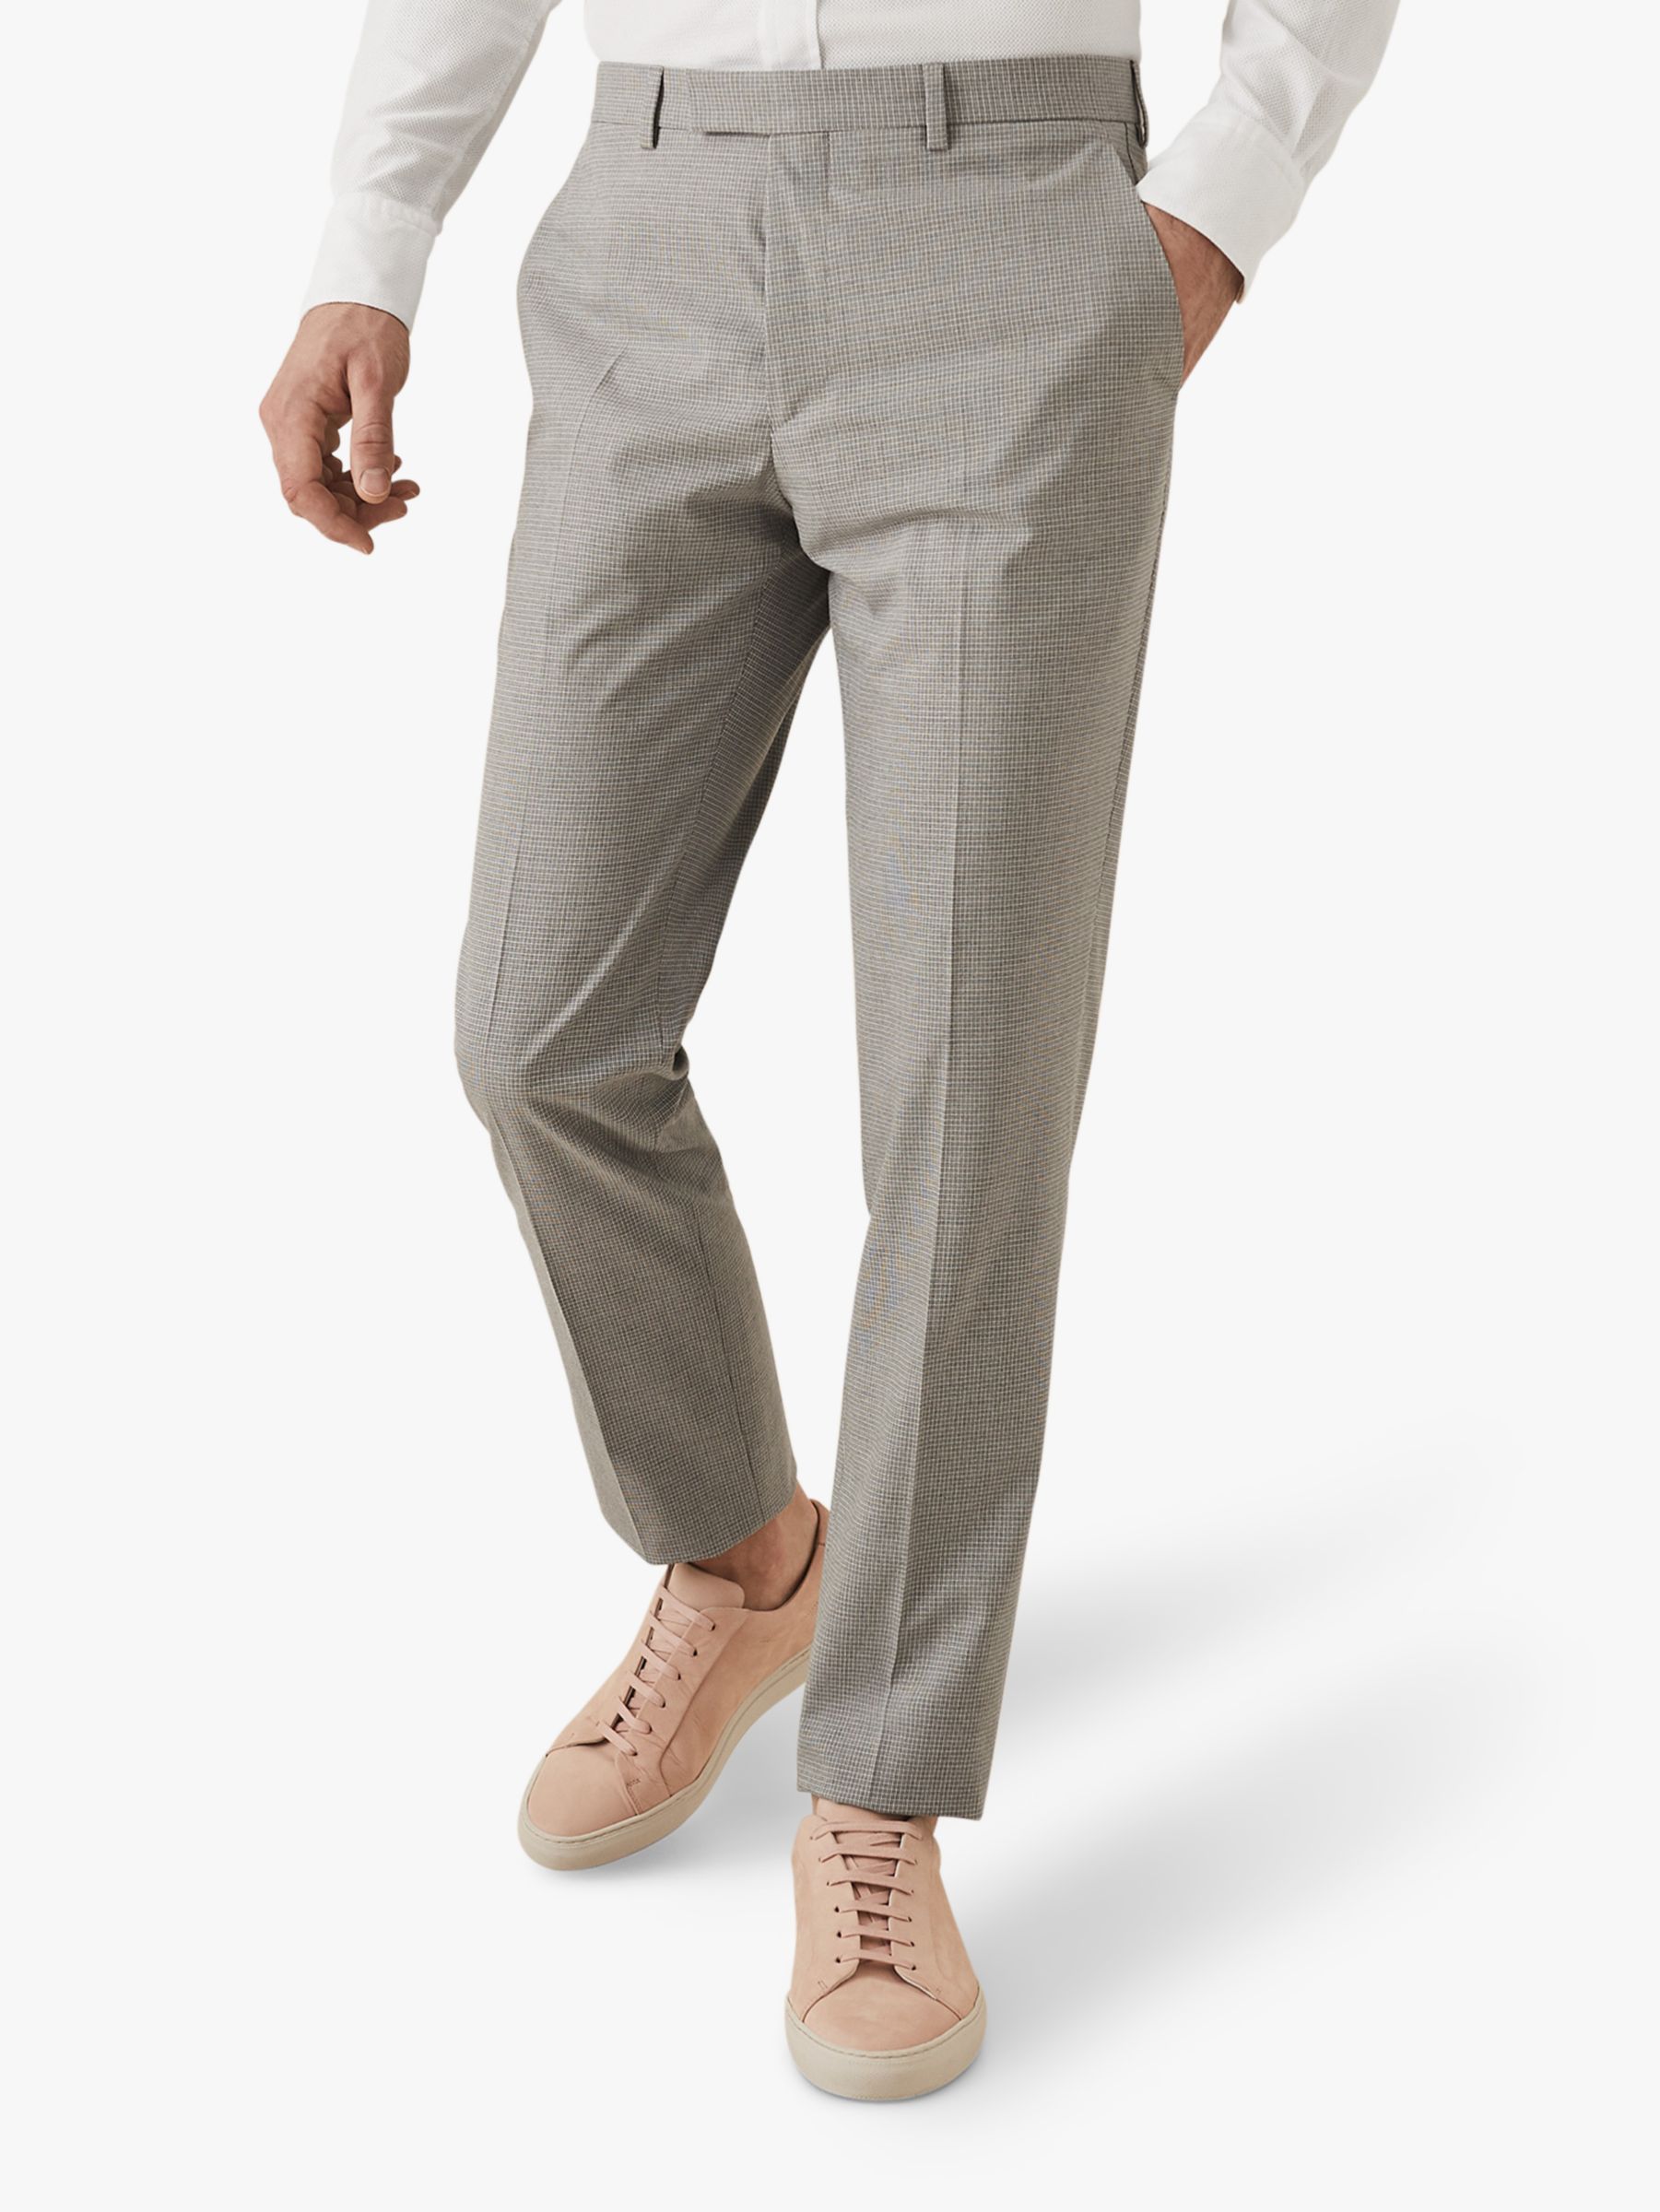 Reiss Gilly Check Slim Fit Trousers, Grey